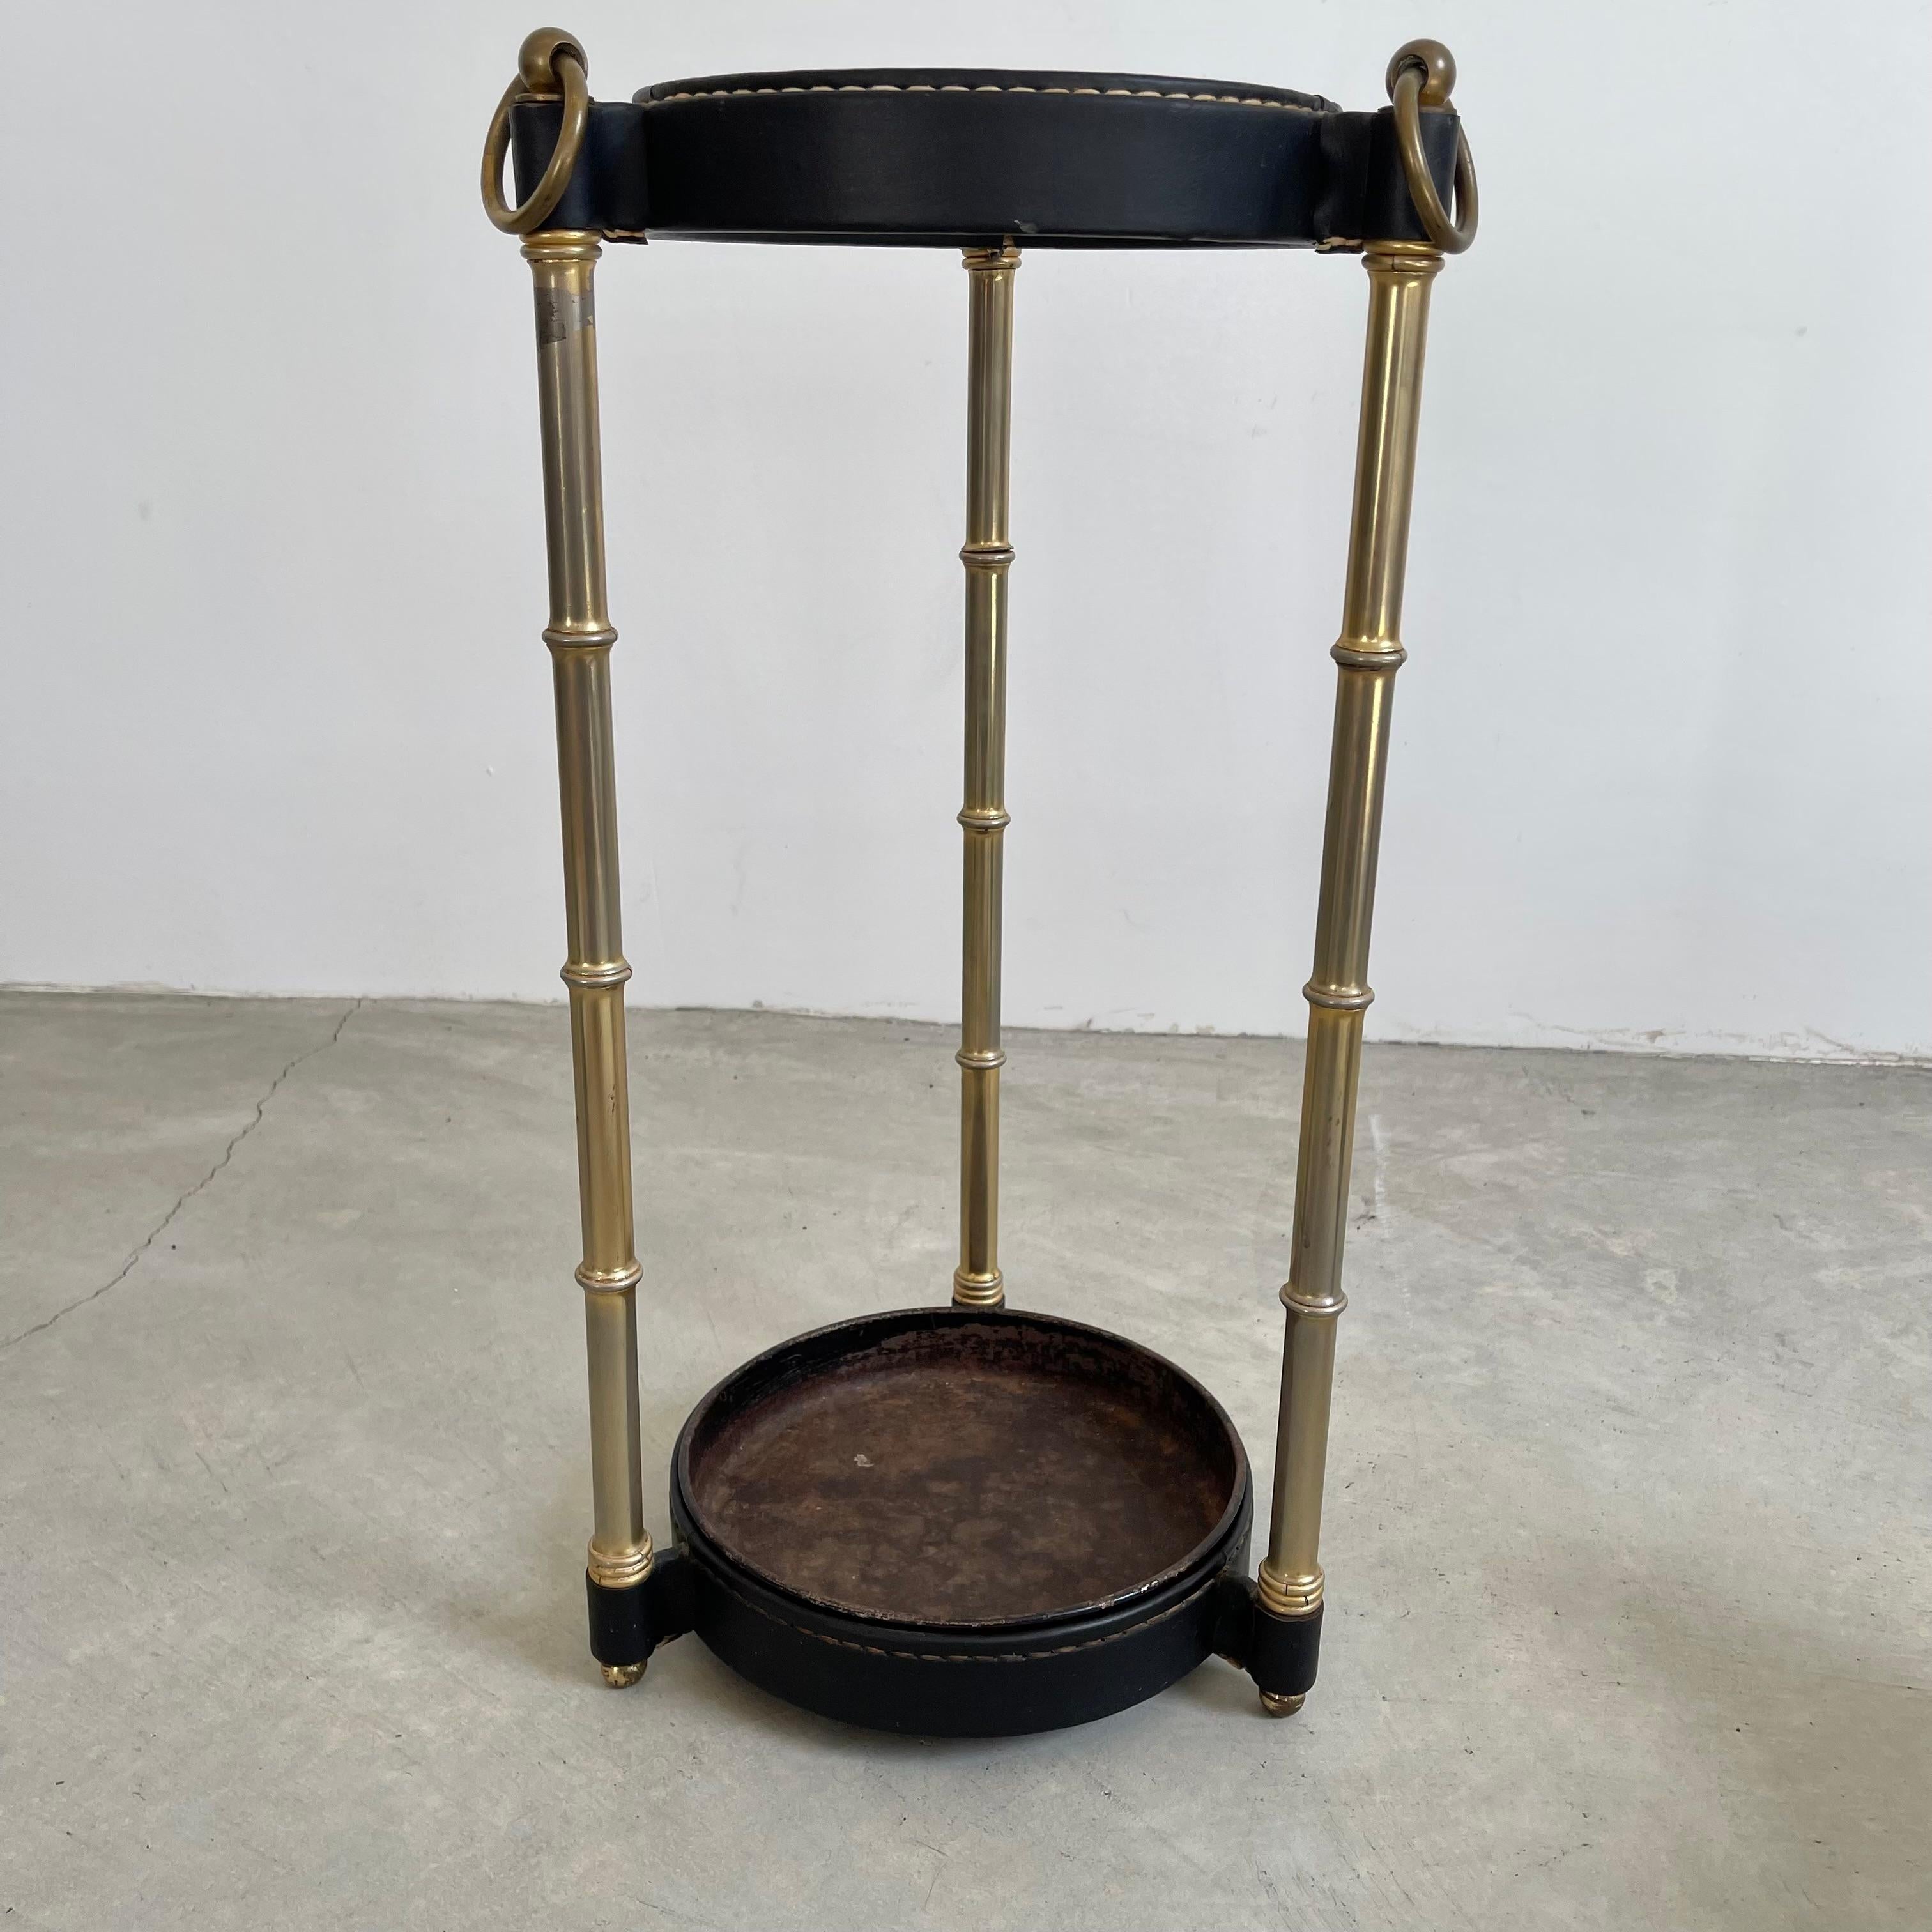 Handsome umbrella stand by Jacques Adnet. Metal upper and lower rings of the frame are wrapped in black leather stitched together with Adnet's signature contrast stitching. Three brass bamboo legs make up the frame with a metal dish at the bottom to